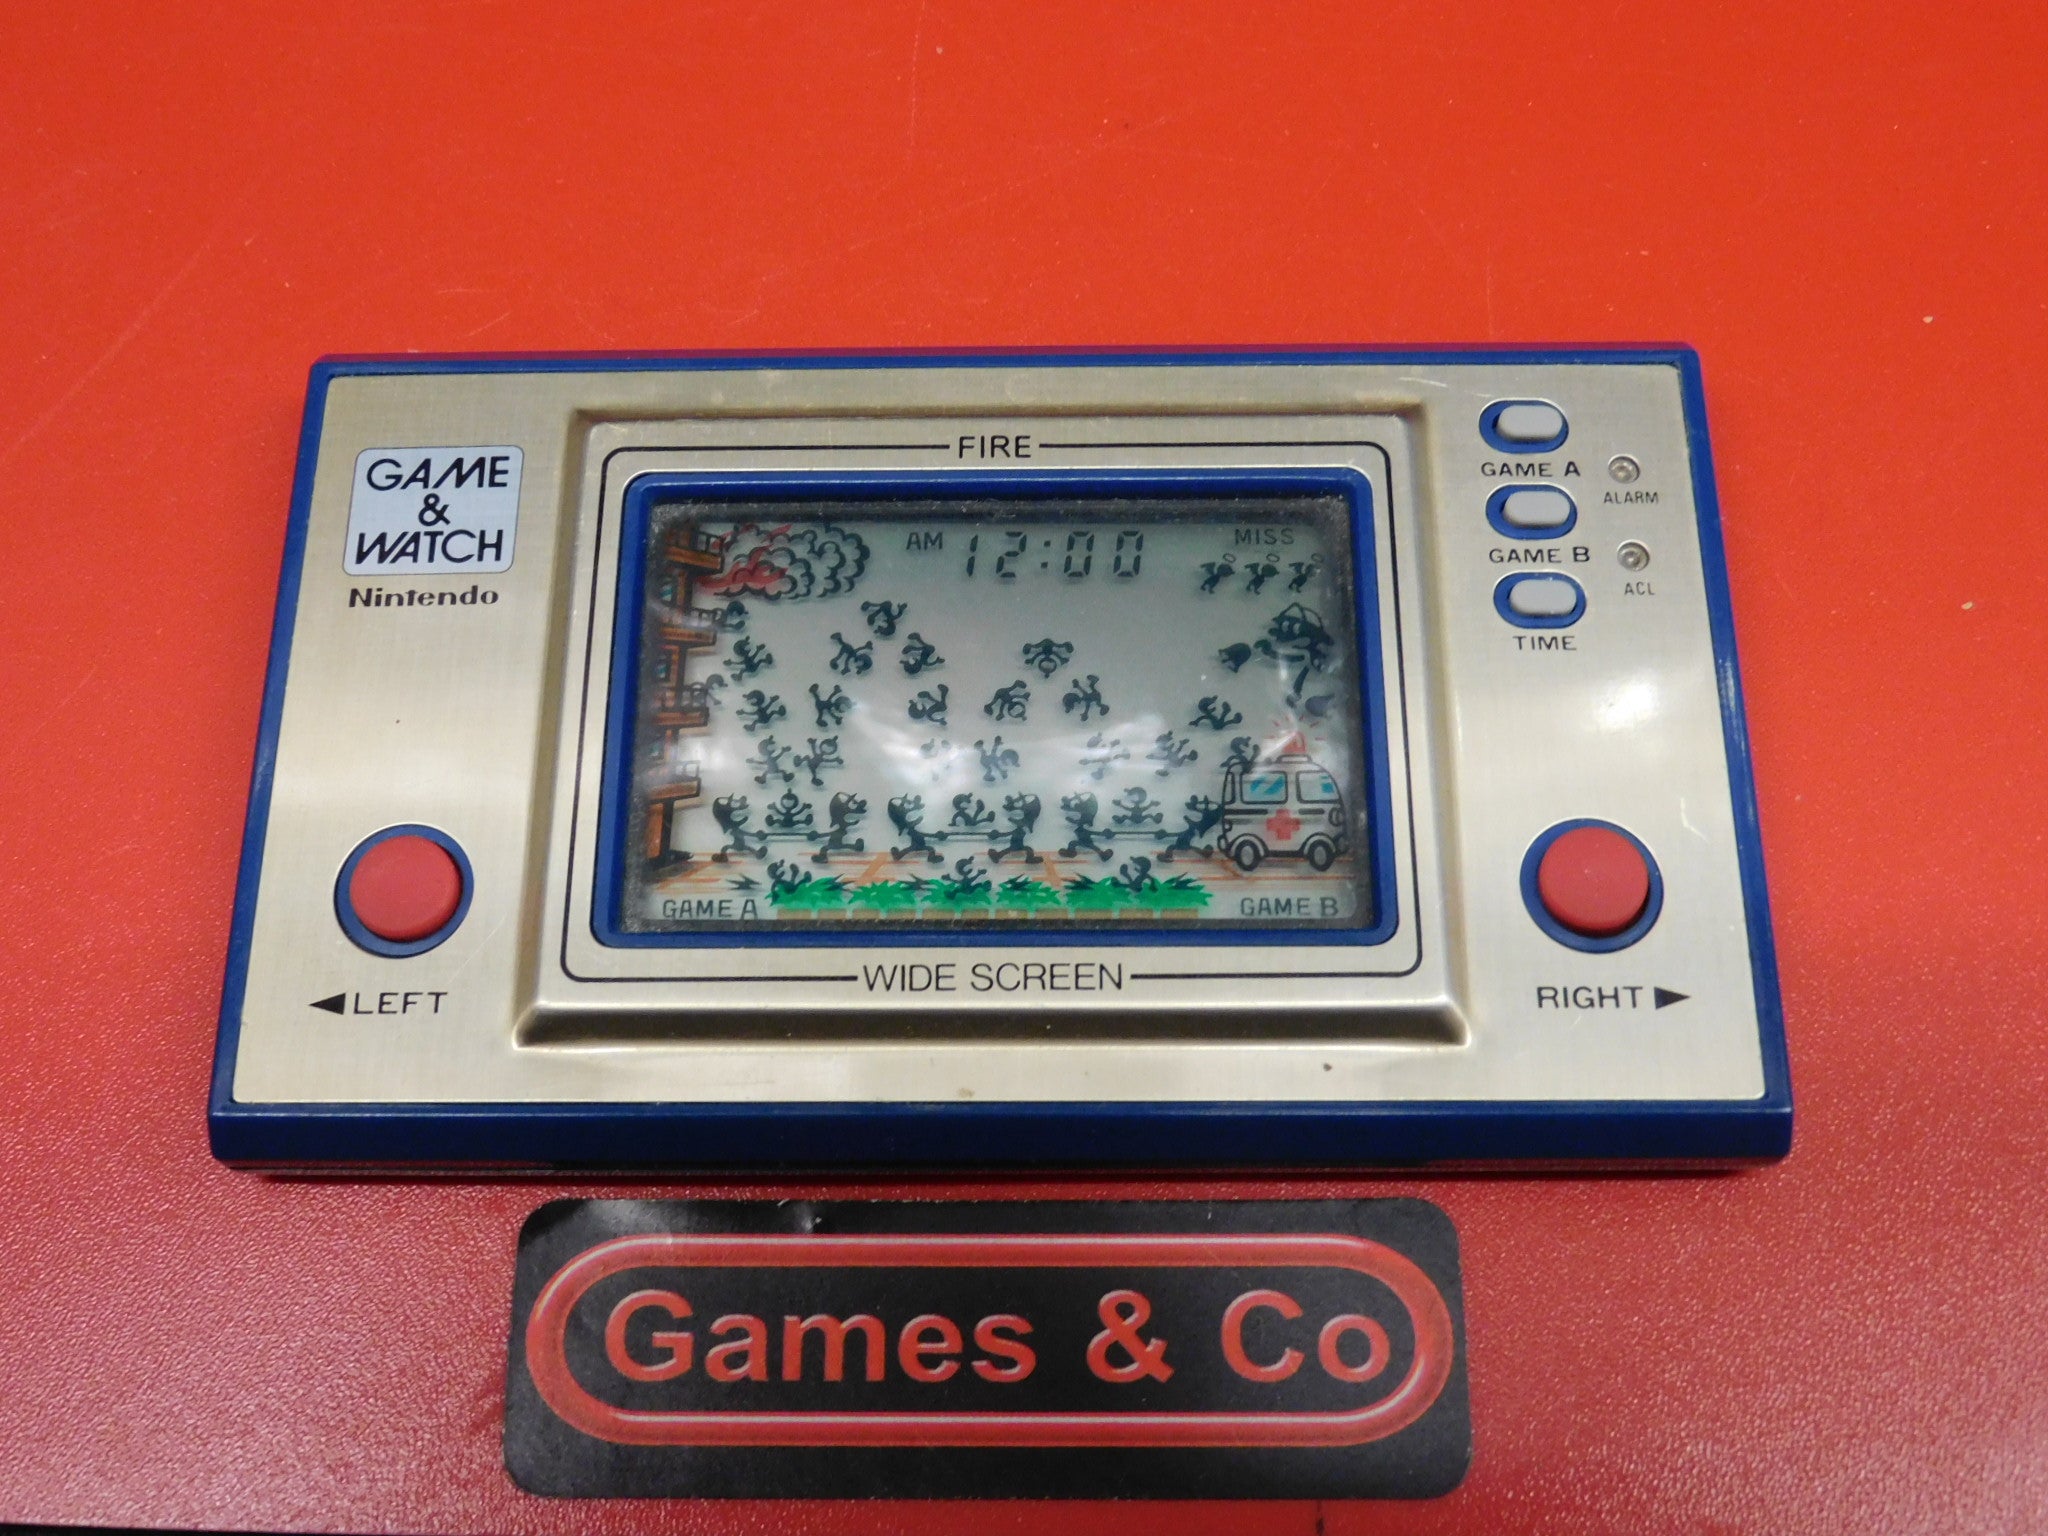 GAME & WATCH FIRE